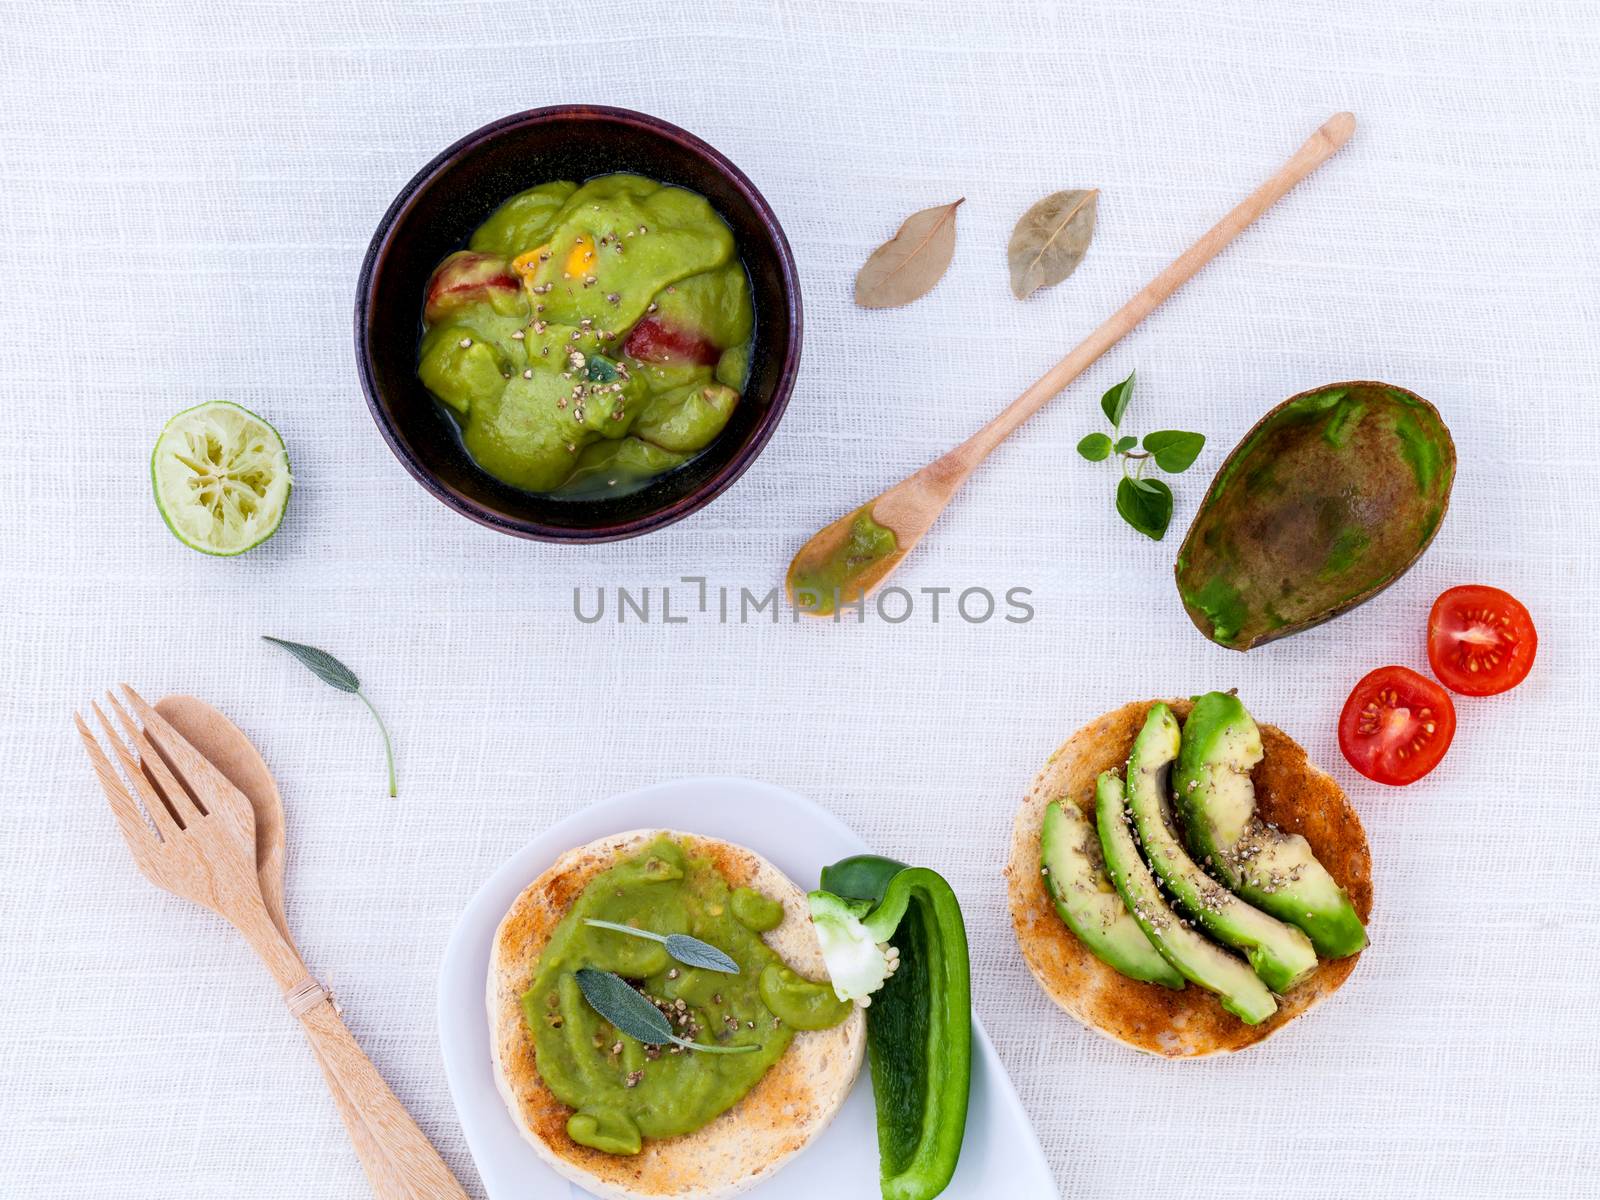 Toast with avocado creamy salad and herbs  on white table.